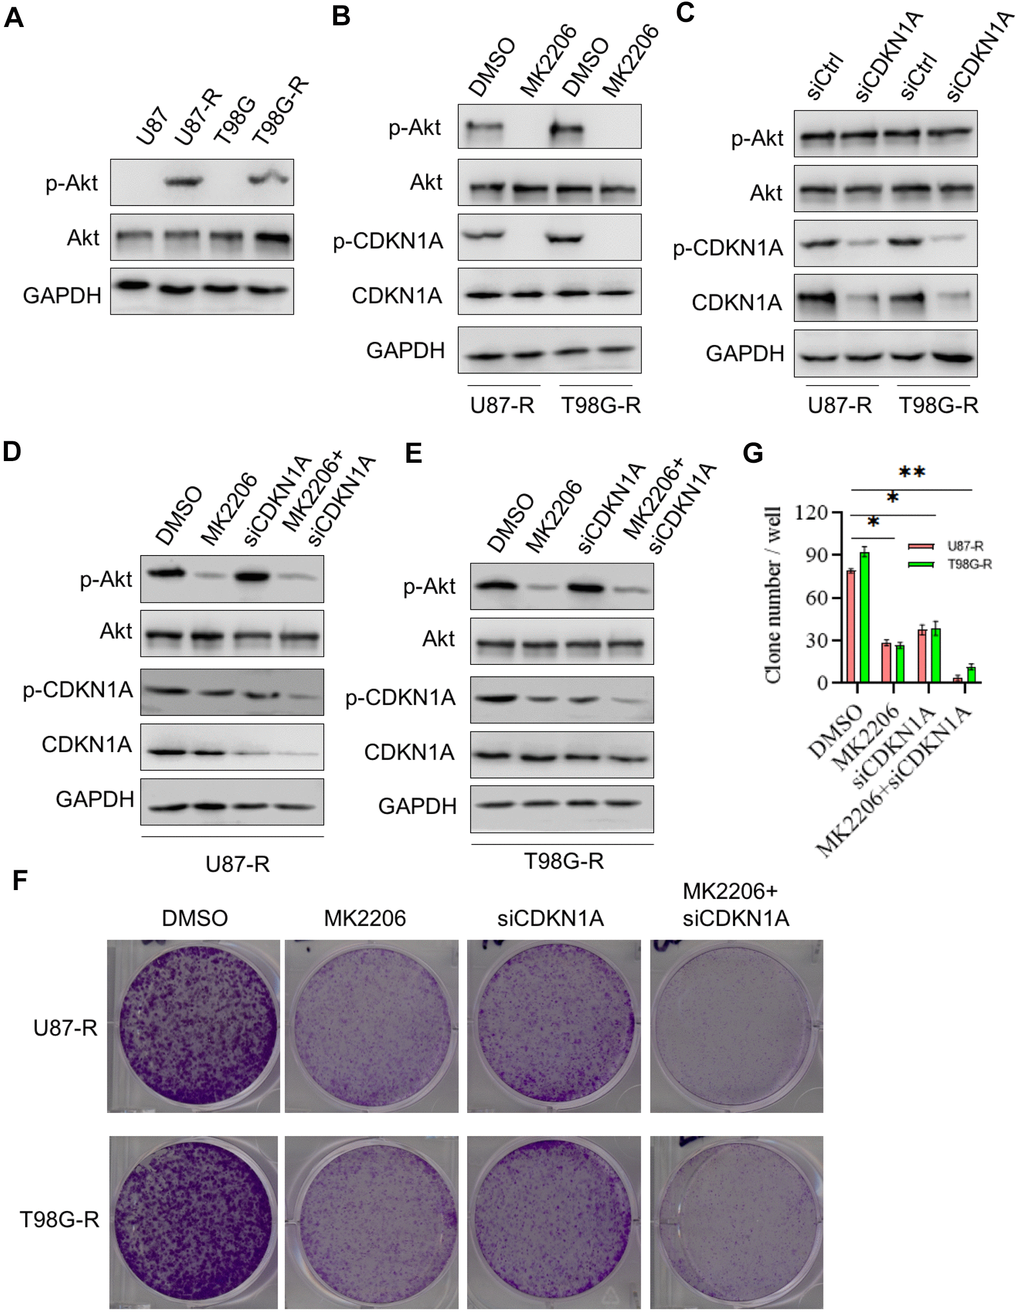 CDKN1A was involved in TMZ resistance of glioma cells. (A) Western blot for phospho-Akt (Ser-473), Akt in U87, U87-R T98G, and T98G-R cells. (B) Western blot for phospho-Akt (Ser-473), Akt, phospho-CDKN1A, and CDKN1A in U87-R or T98G-R cells treated with DMSO and the specific inhibitor to AKT MK2206. (C) Western blot for phospho-Akt (Ser-473), Akt, phospho-CDKN1A, and CDKN1A in U87-R or T98G-R cells treated with siCtrl and siCDKN1A. (D) Western blot for phospho-Akt (Ser-473), Akt, phospho-CDKN1A, and CDKN1A in U87-R cells treated with DMSO, MK2206, siCDKN1A and MK2206 plus siCDKN1A. (E) Western blot for phospho-Akt (Ser-473), Akt, phospho-CDKN1A, and CDKN1A in T98G-R cells treated with DMSO, MK2206, siCDKN1A and MK2206 plus siCDKN1A. (F, G) Colony formation assay of U87-R or T98G-R cells treated with DMSO, MK2206, siCDKN1A and MK2206 plus siCDKN1A. The results were presented as means ± SD (n = 3 for each panel). Statistical significance was concluded at *P 